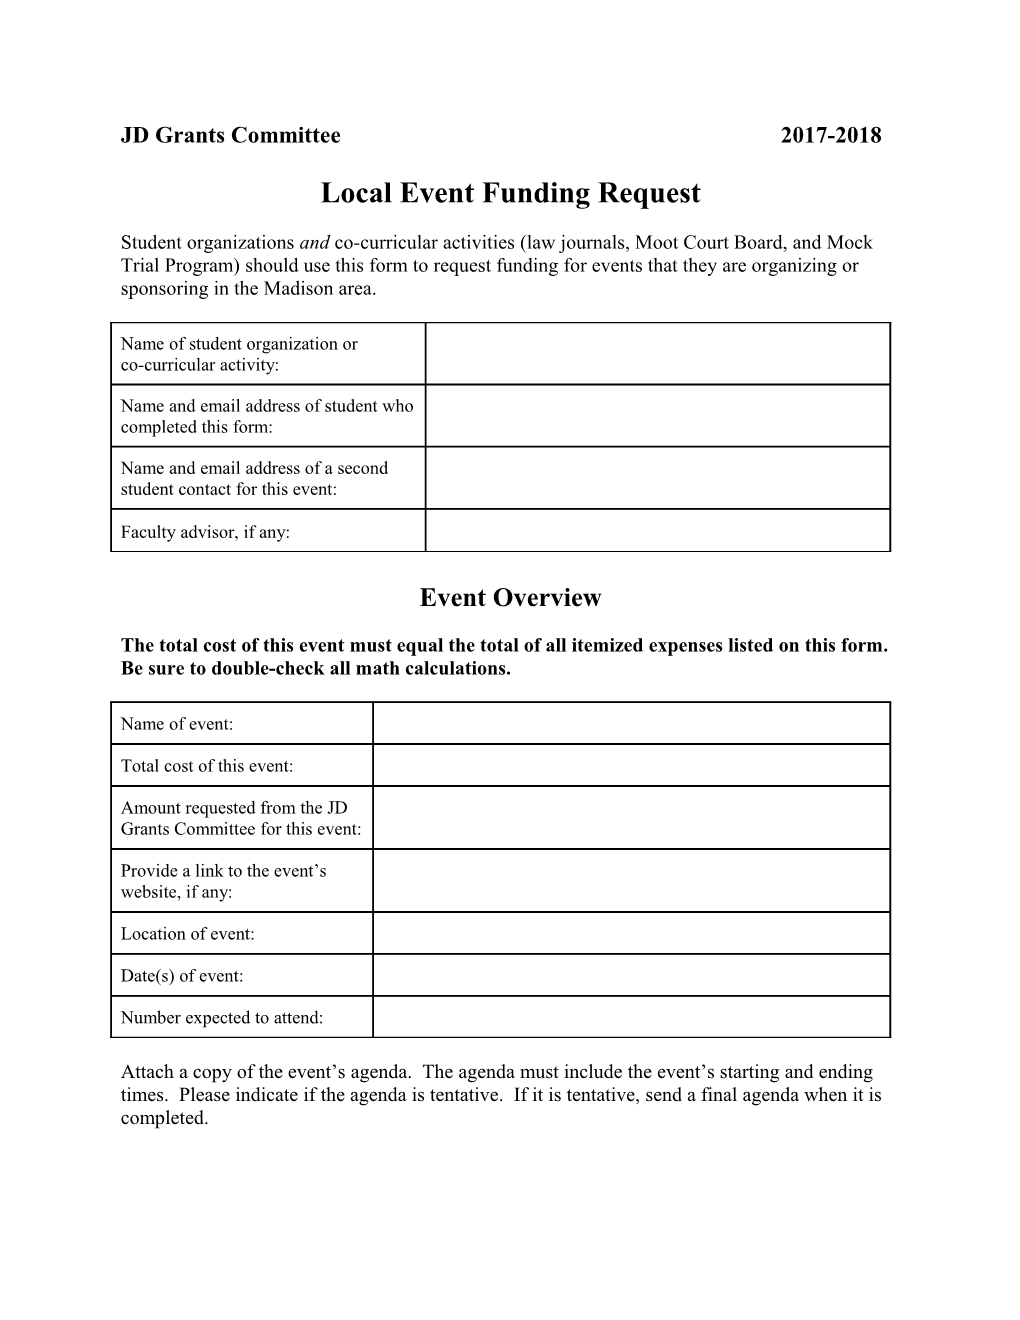 Local Event Funding Request